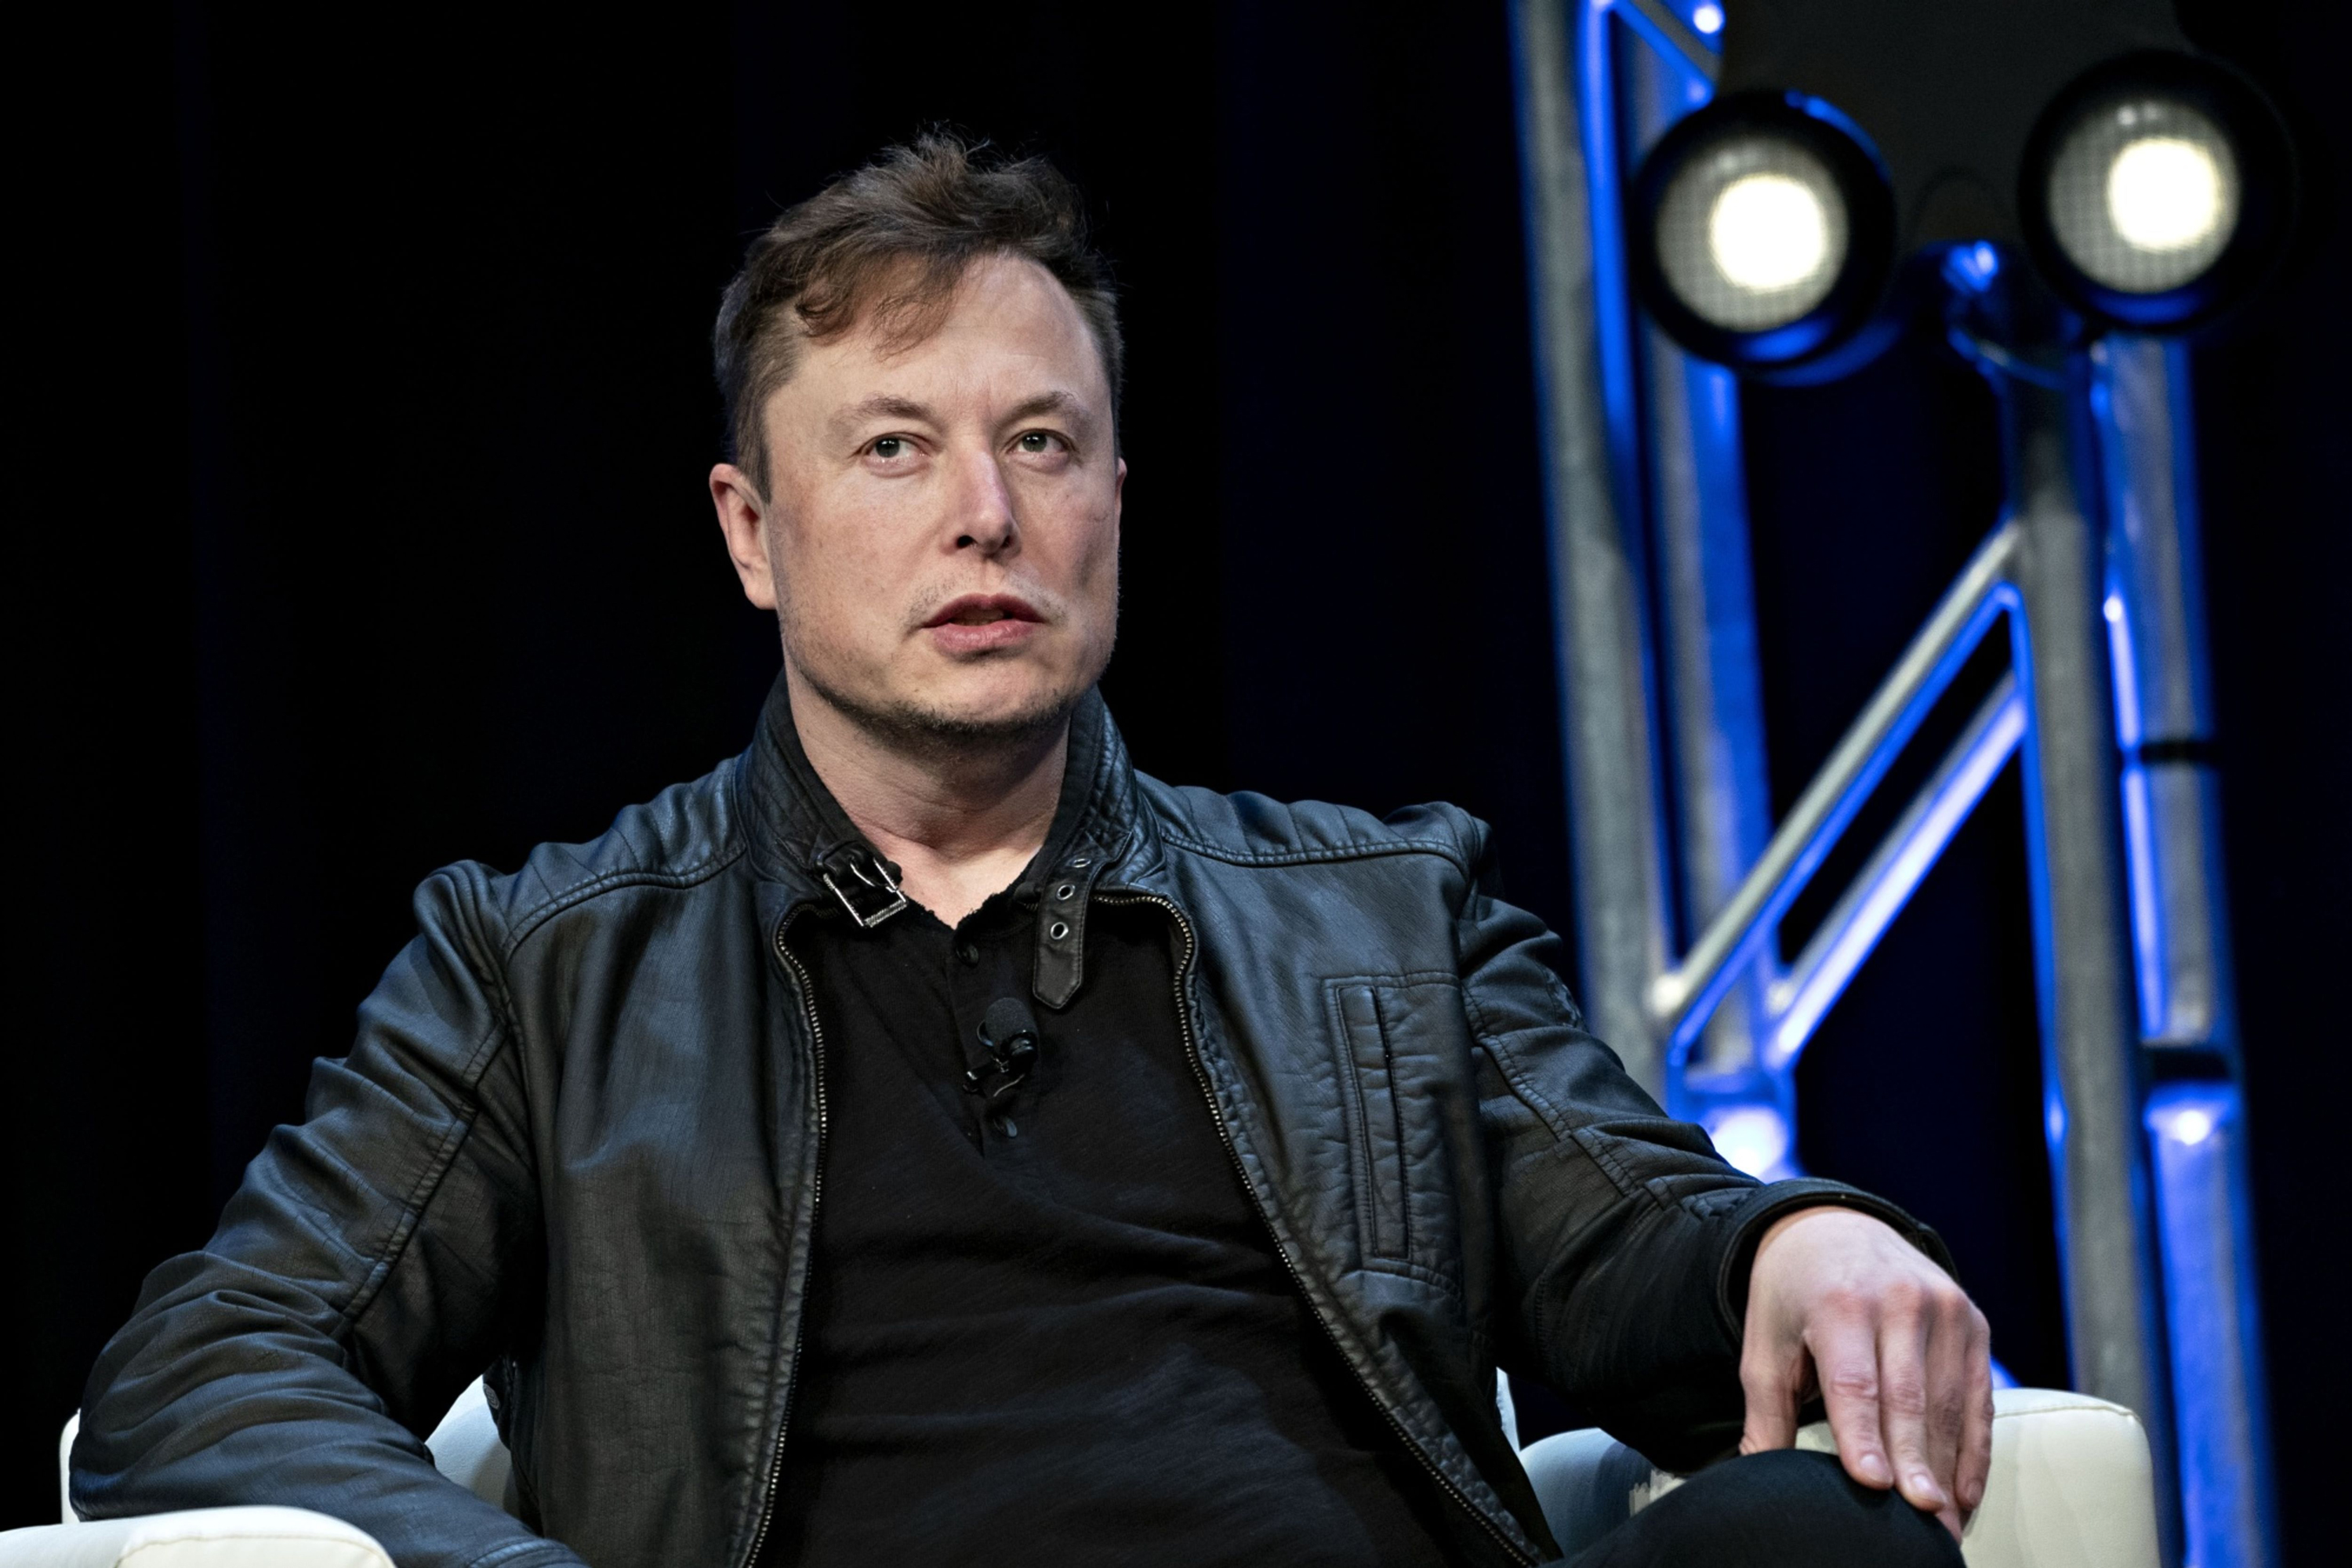 Musk said to go ahead with $54.20 a share Twitter deal